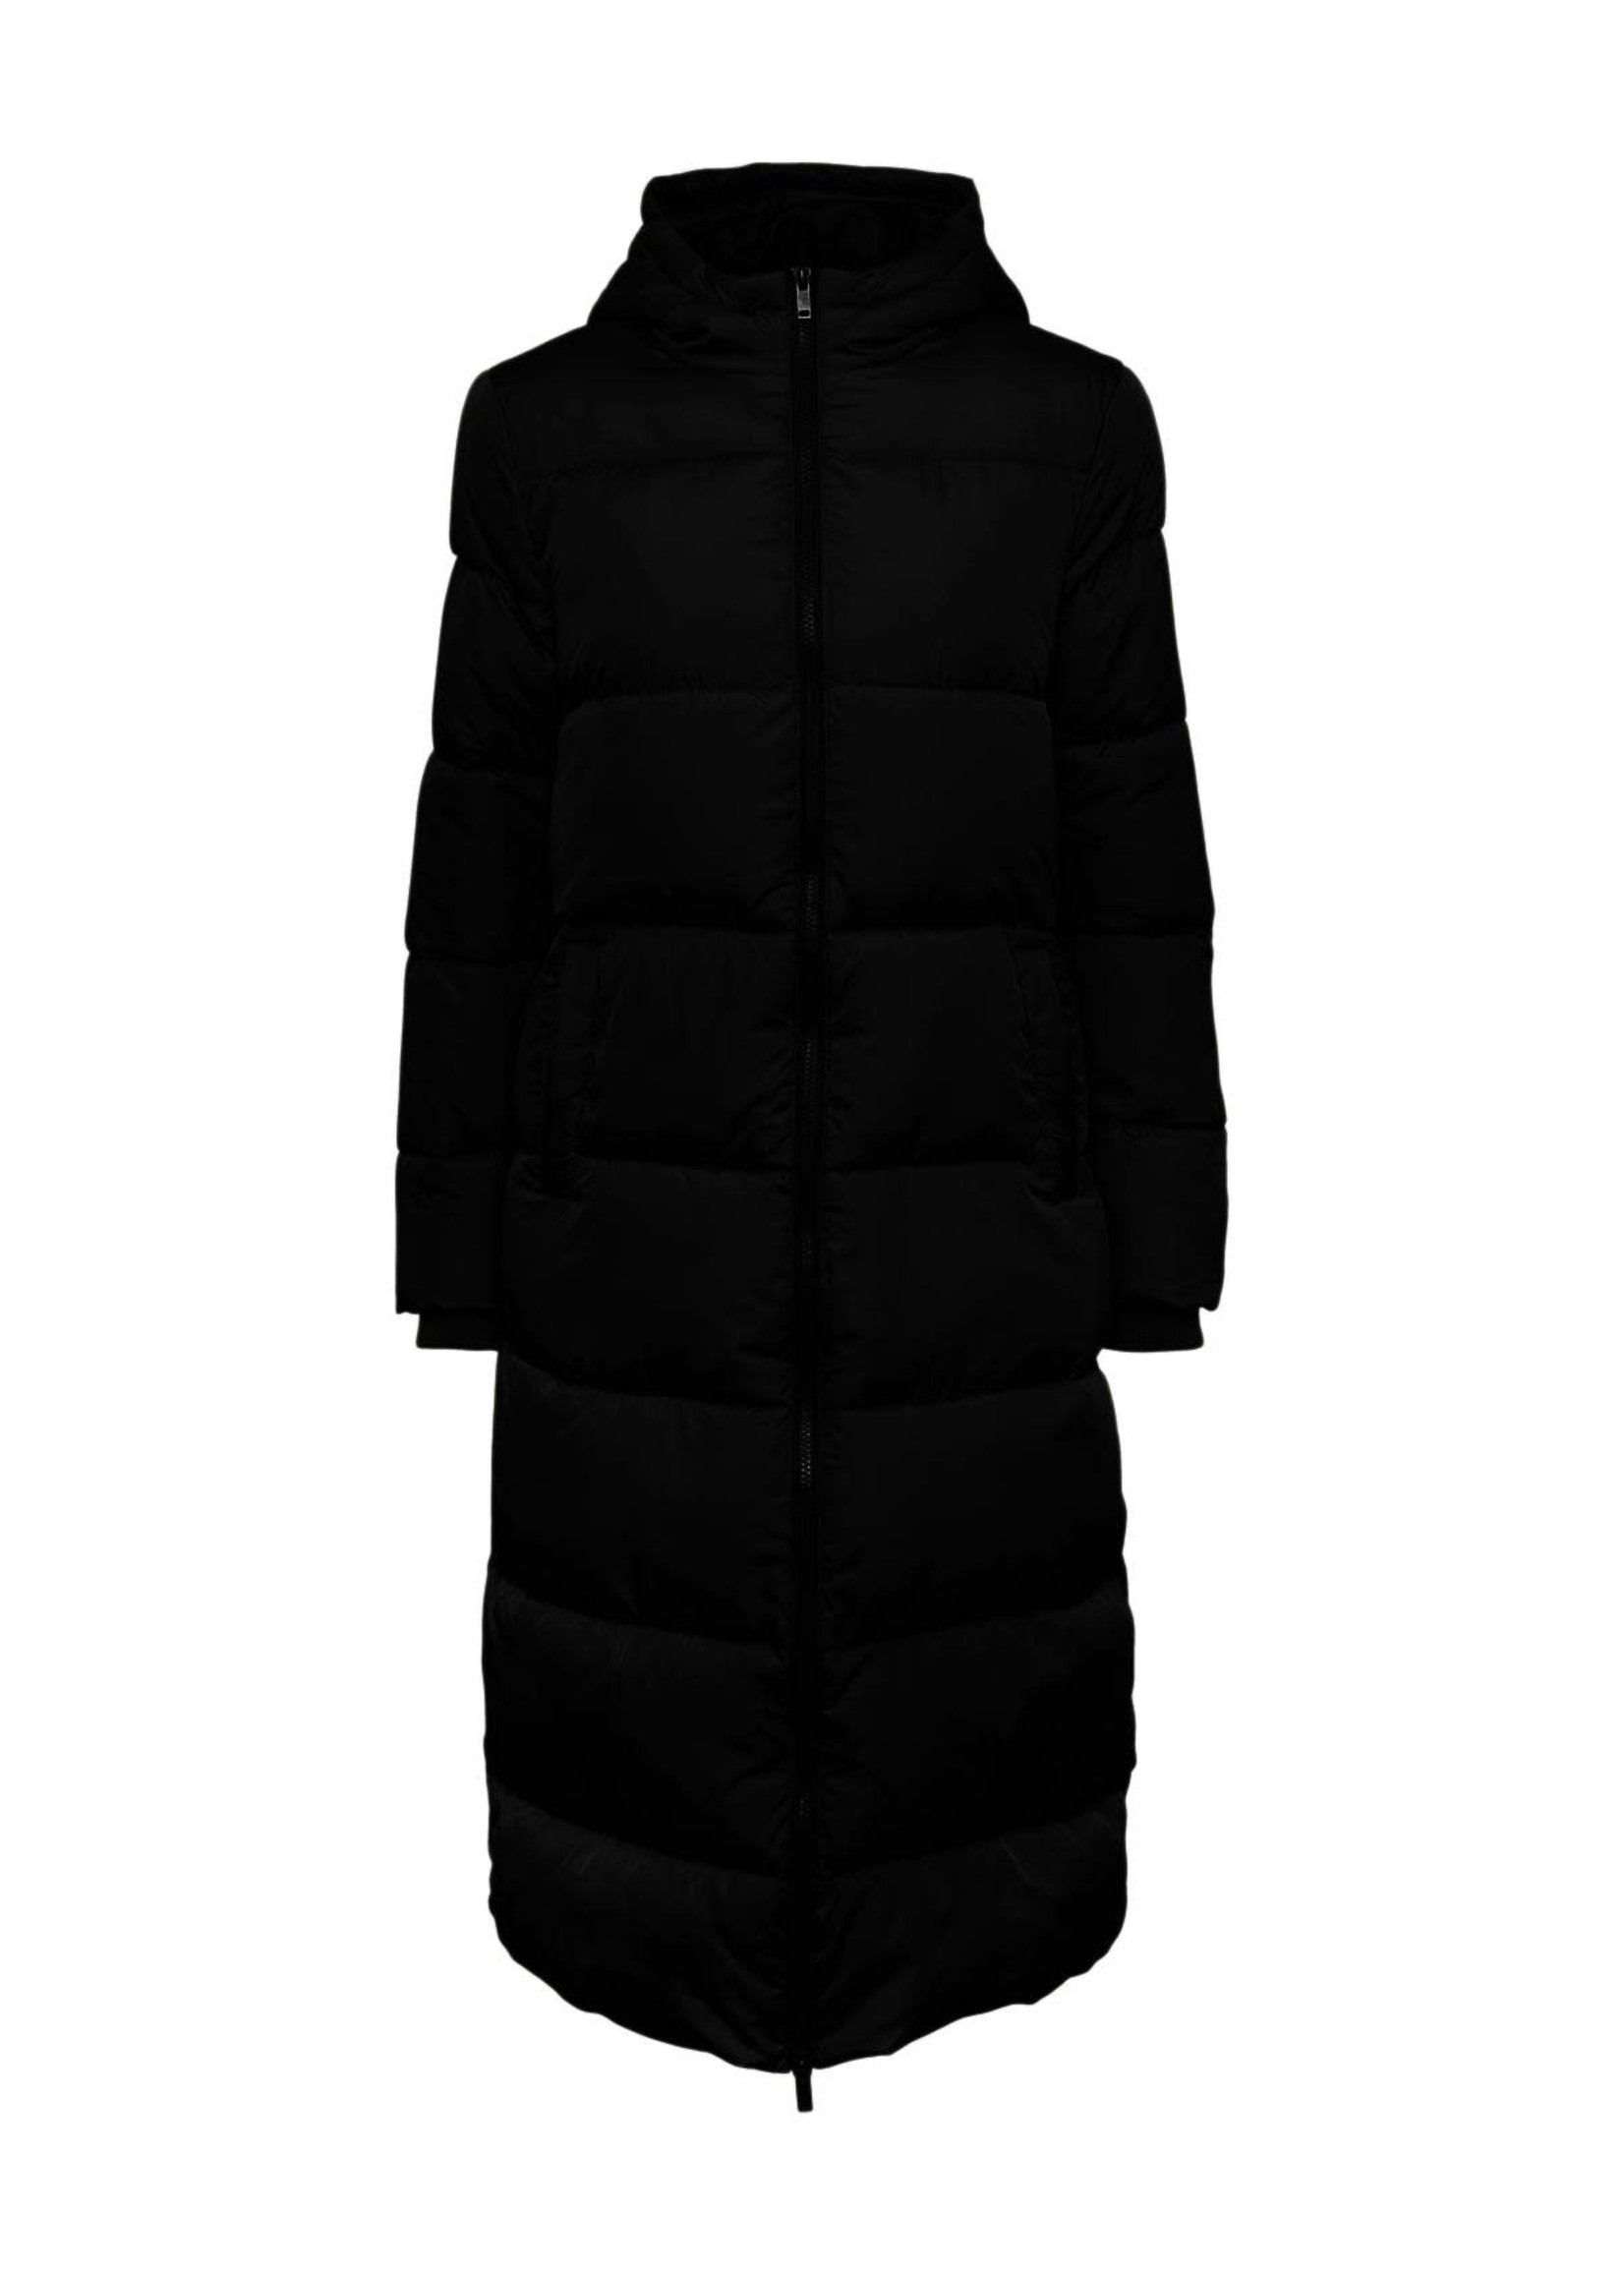 PIECES BEE NEW ULTRA LONG PUFFER JACKET BC black